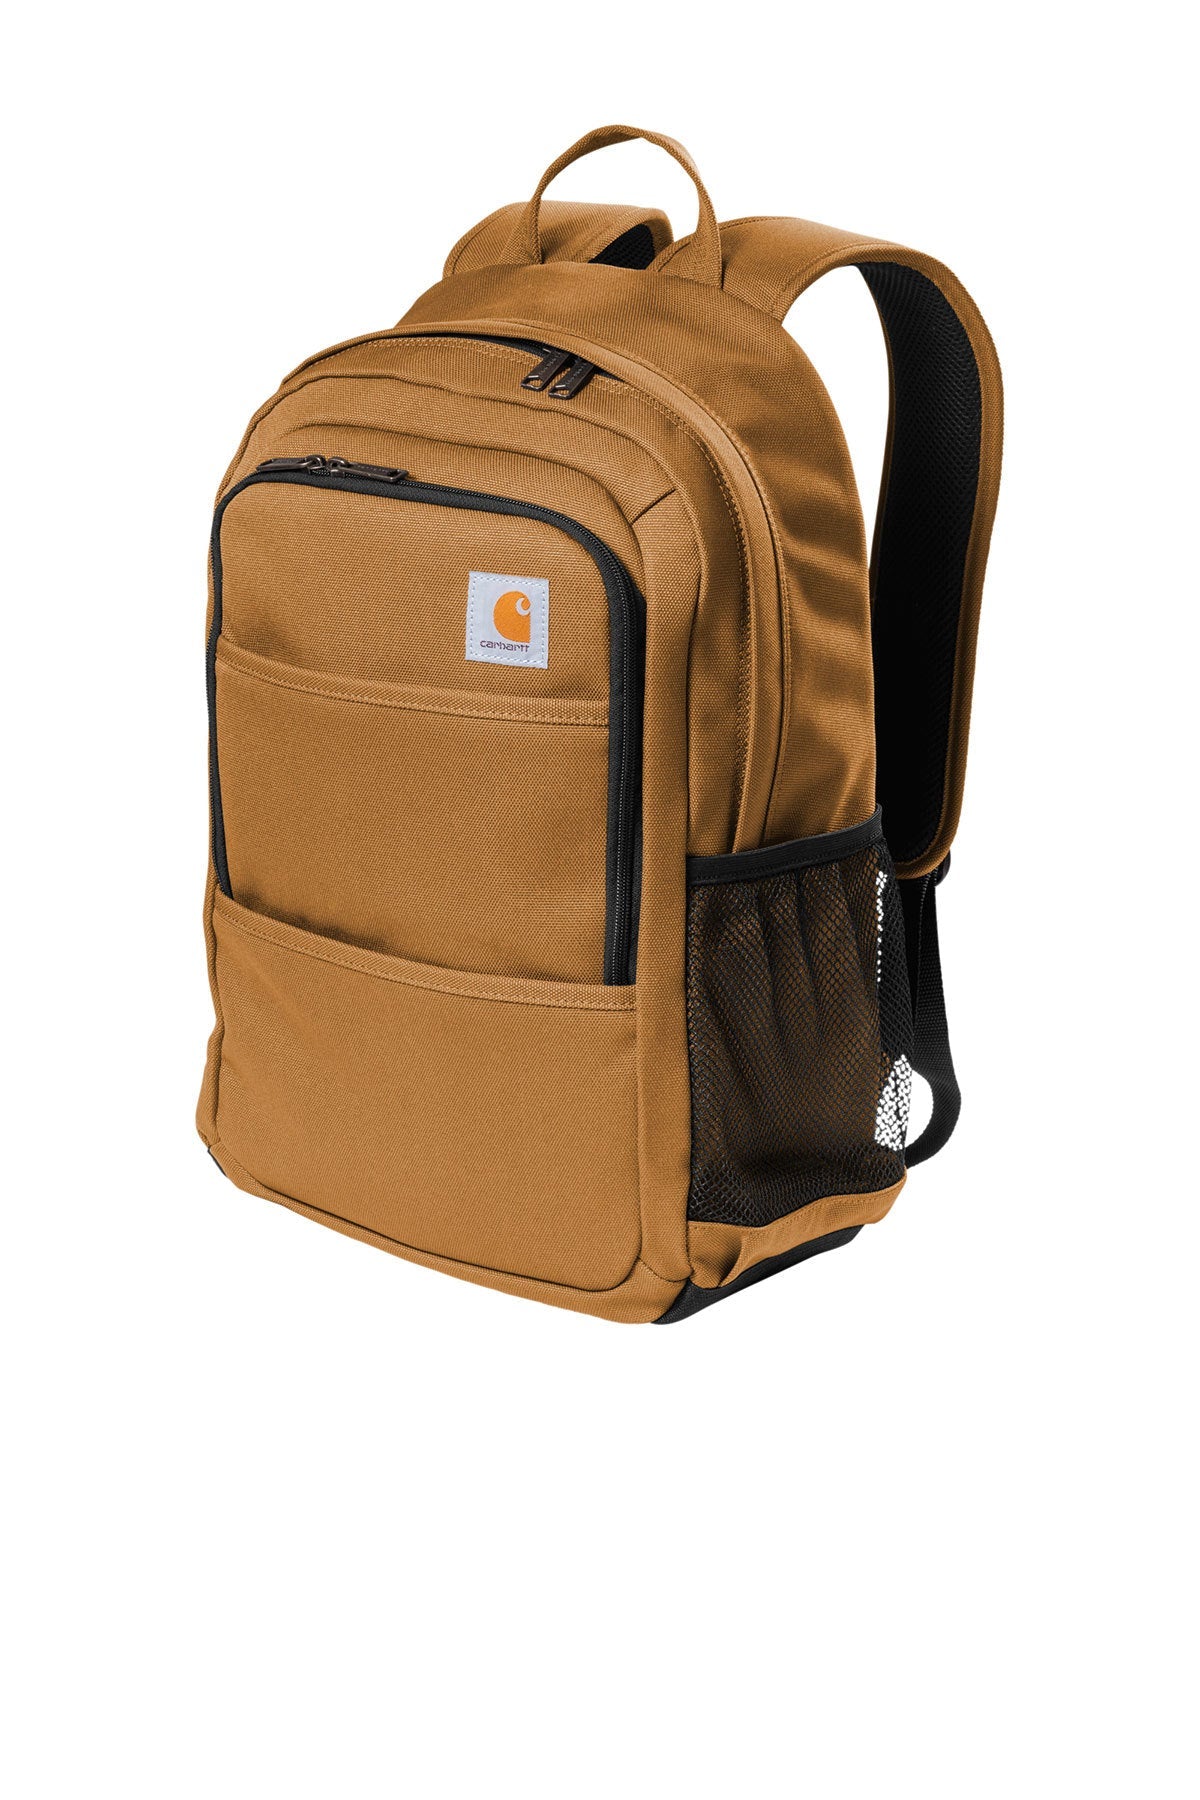 CT89350303 Carhartt® Foundry Series Backpack